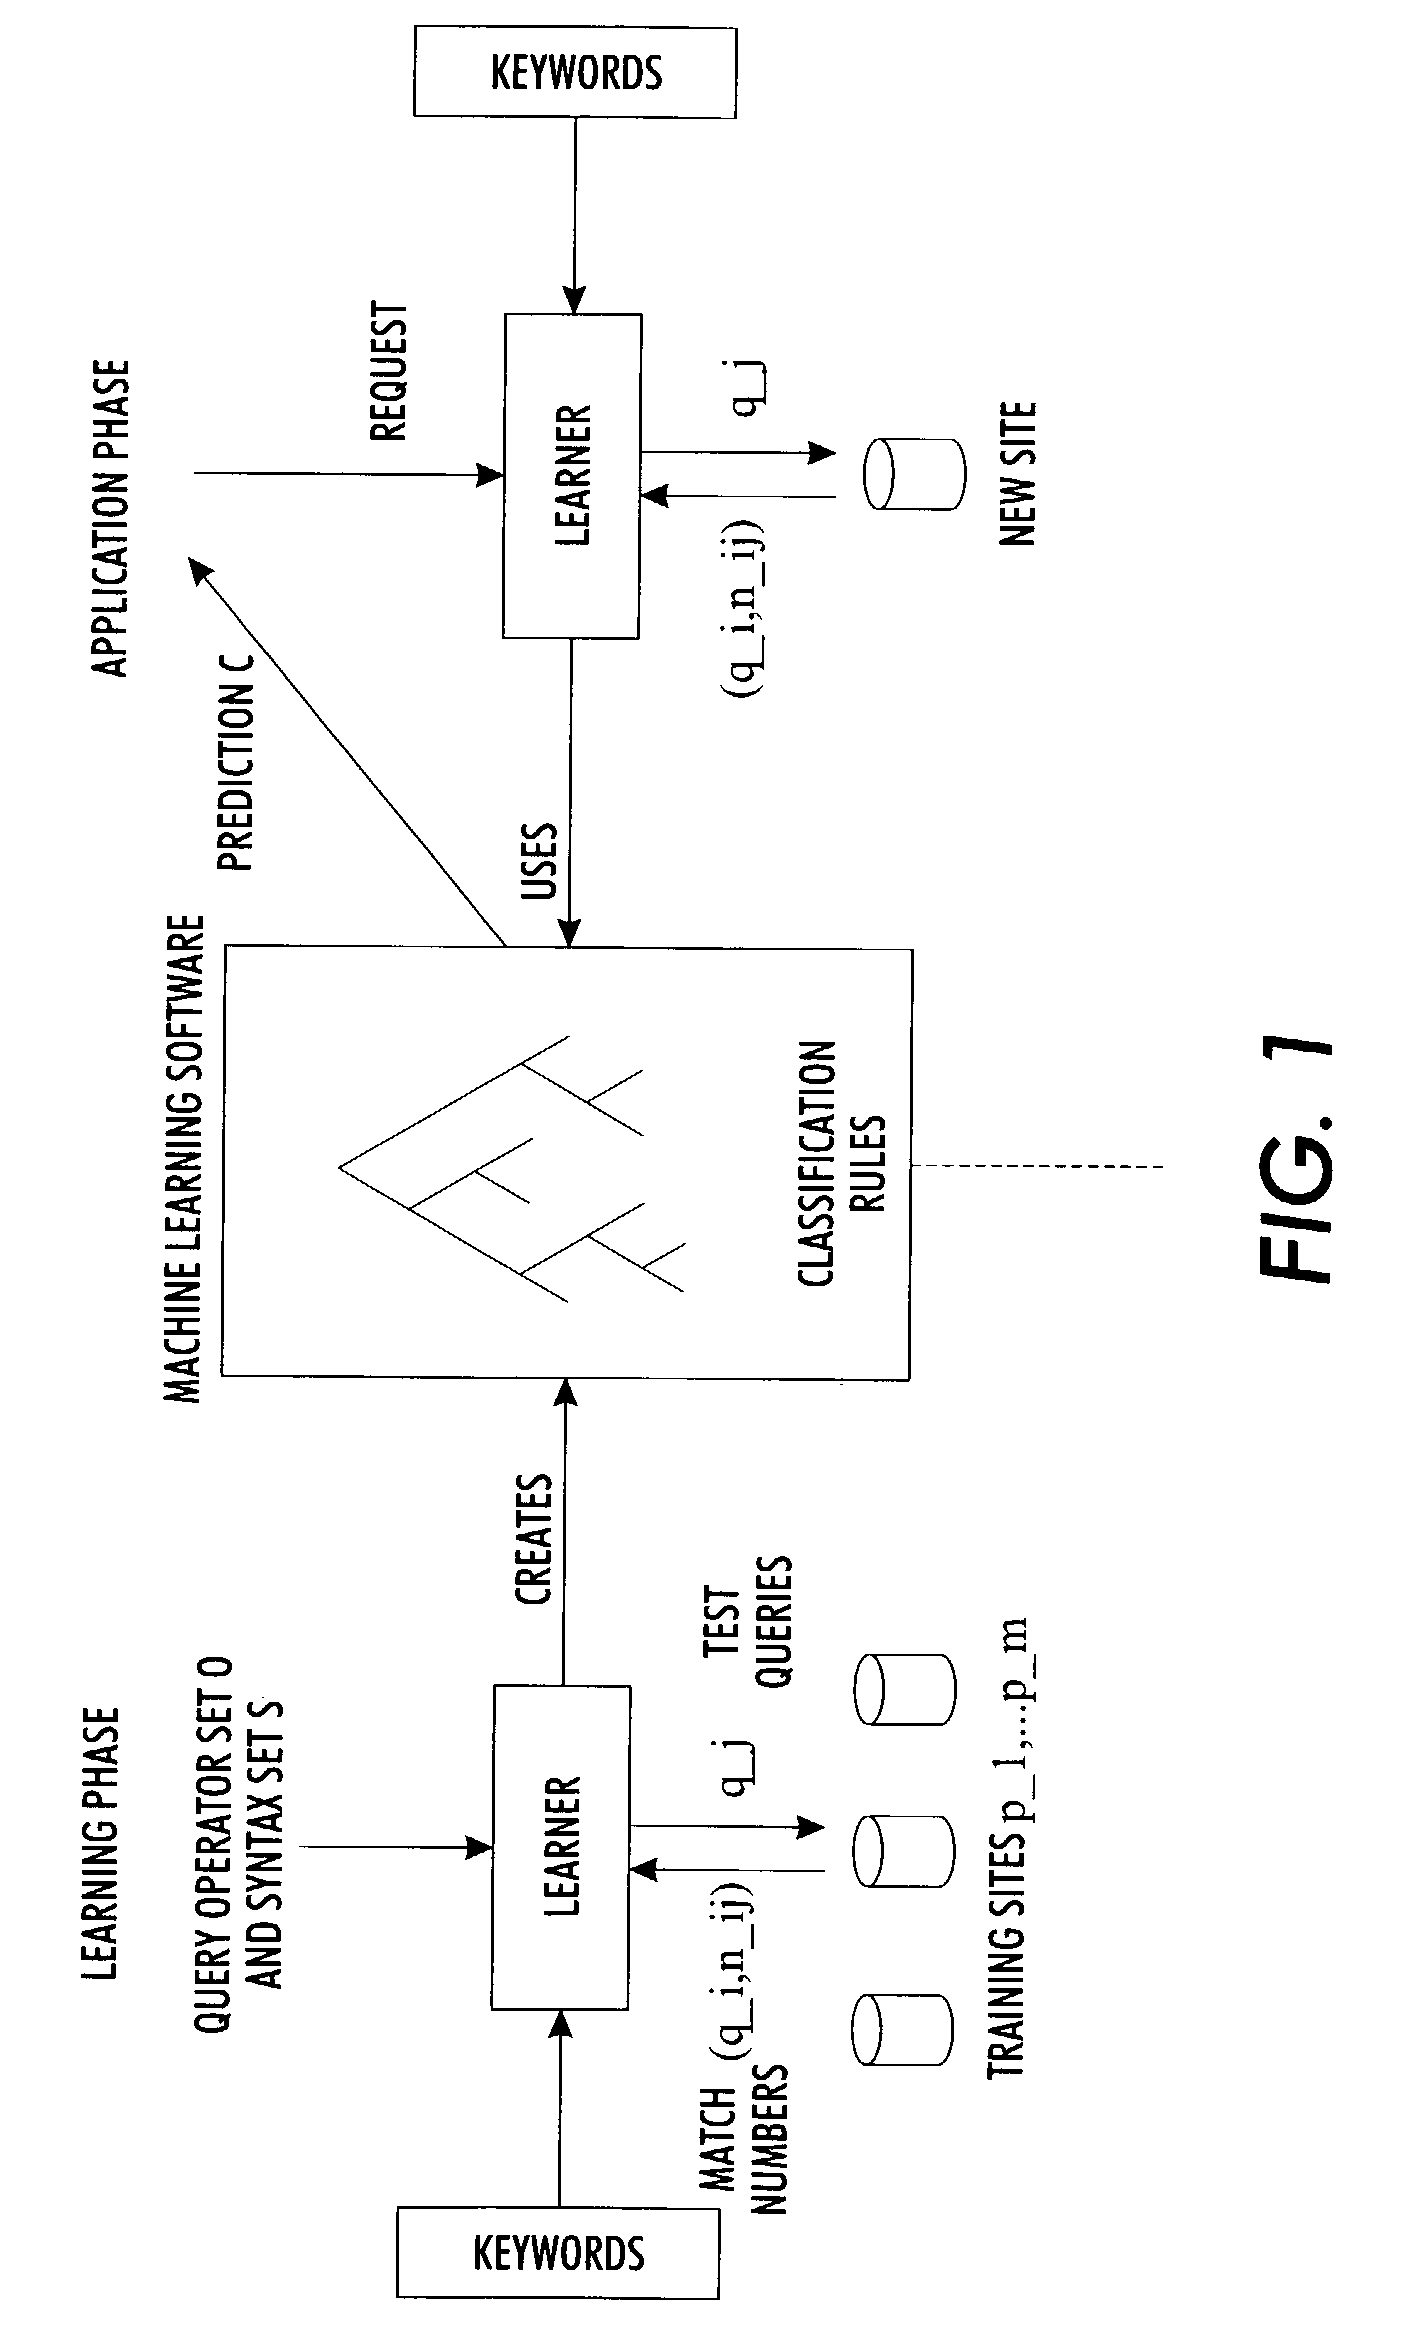 Method for automatic discovery of query language features of web sites